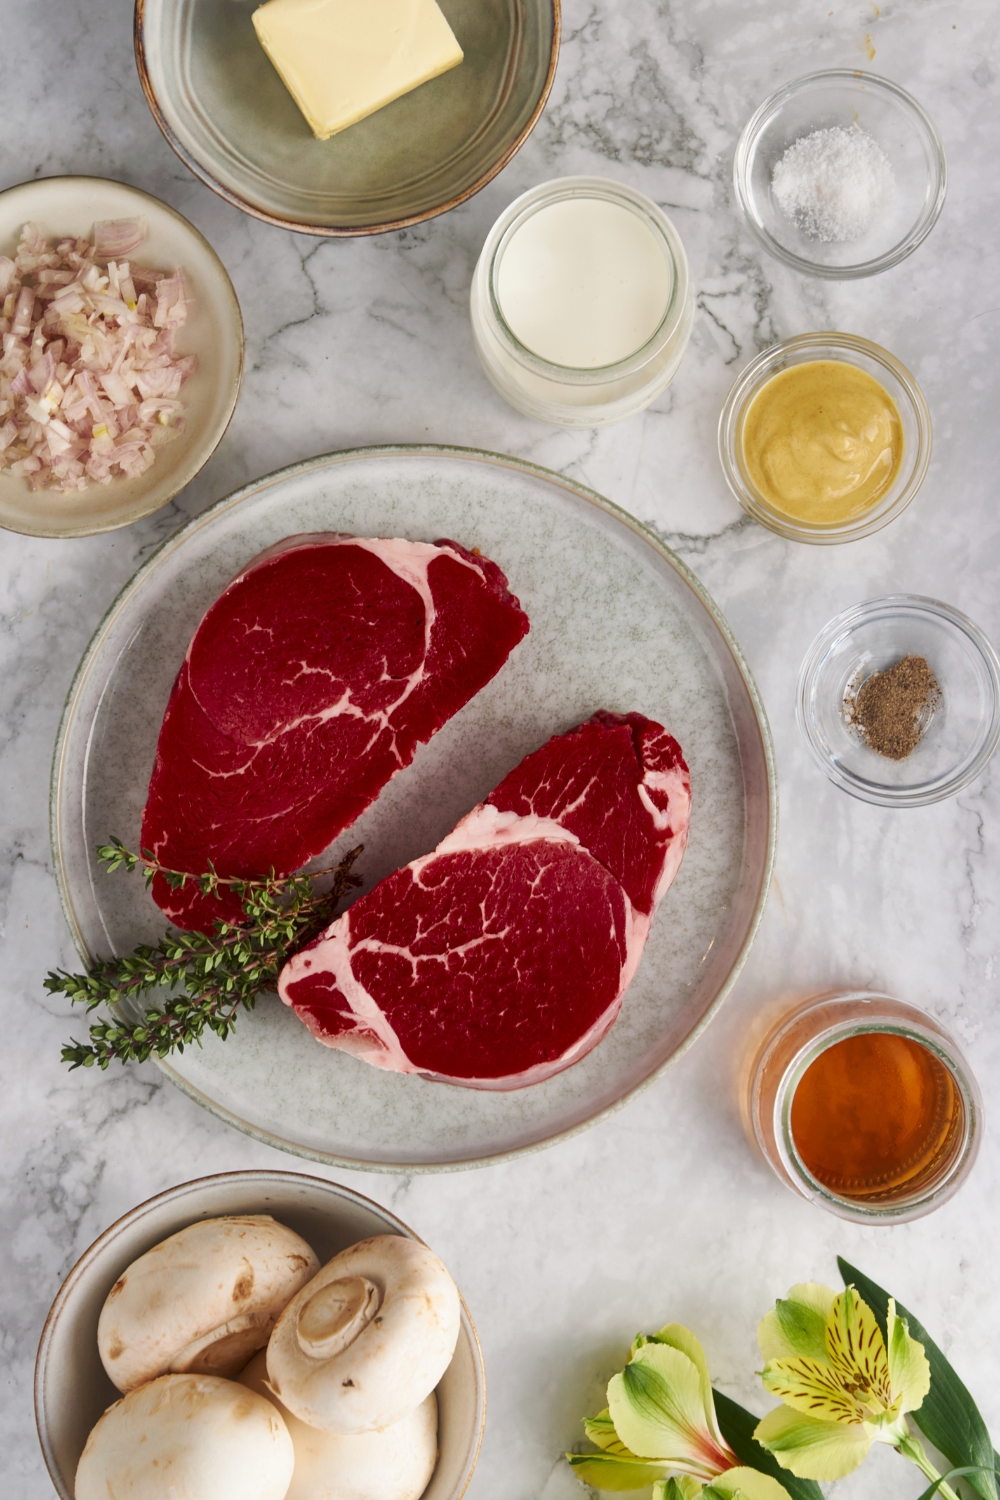 Overhead view of an assortment of ingredients including two raw steaks, fresh herbs, jars of brandy and cream, and bowls of salt, pepper, mustard, mushrooms, butter, and diced shallots.